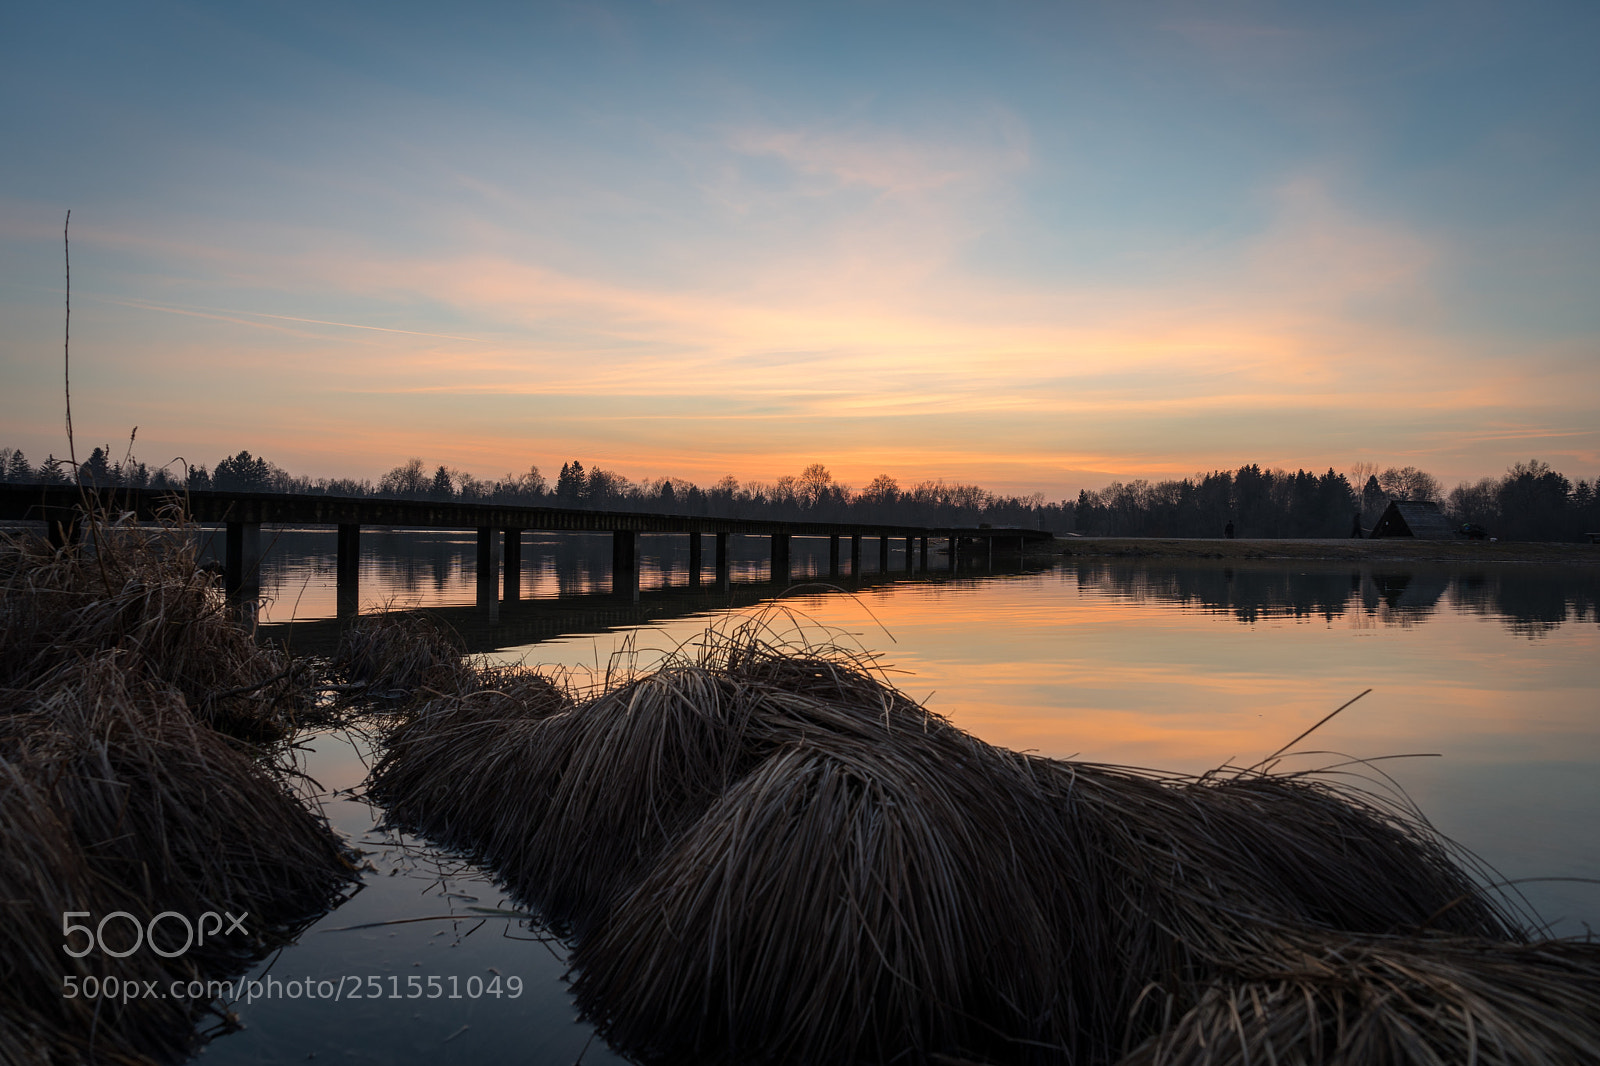 Sony a7 II sample photo. Sonnenuntergang am weitmannsee photography